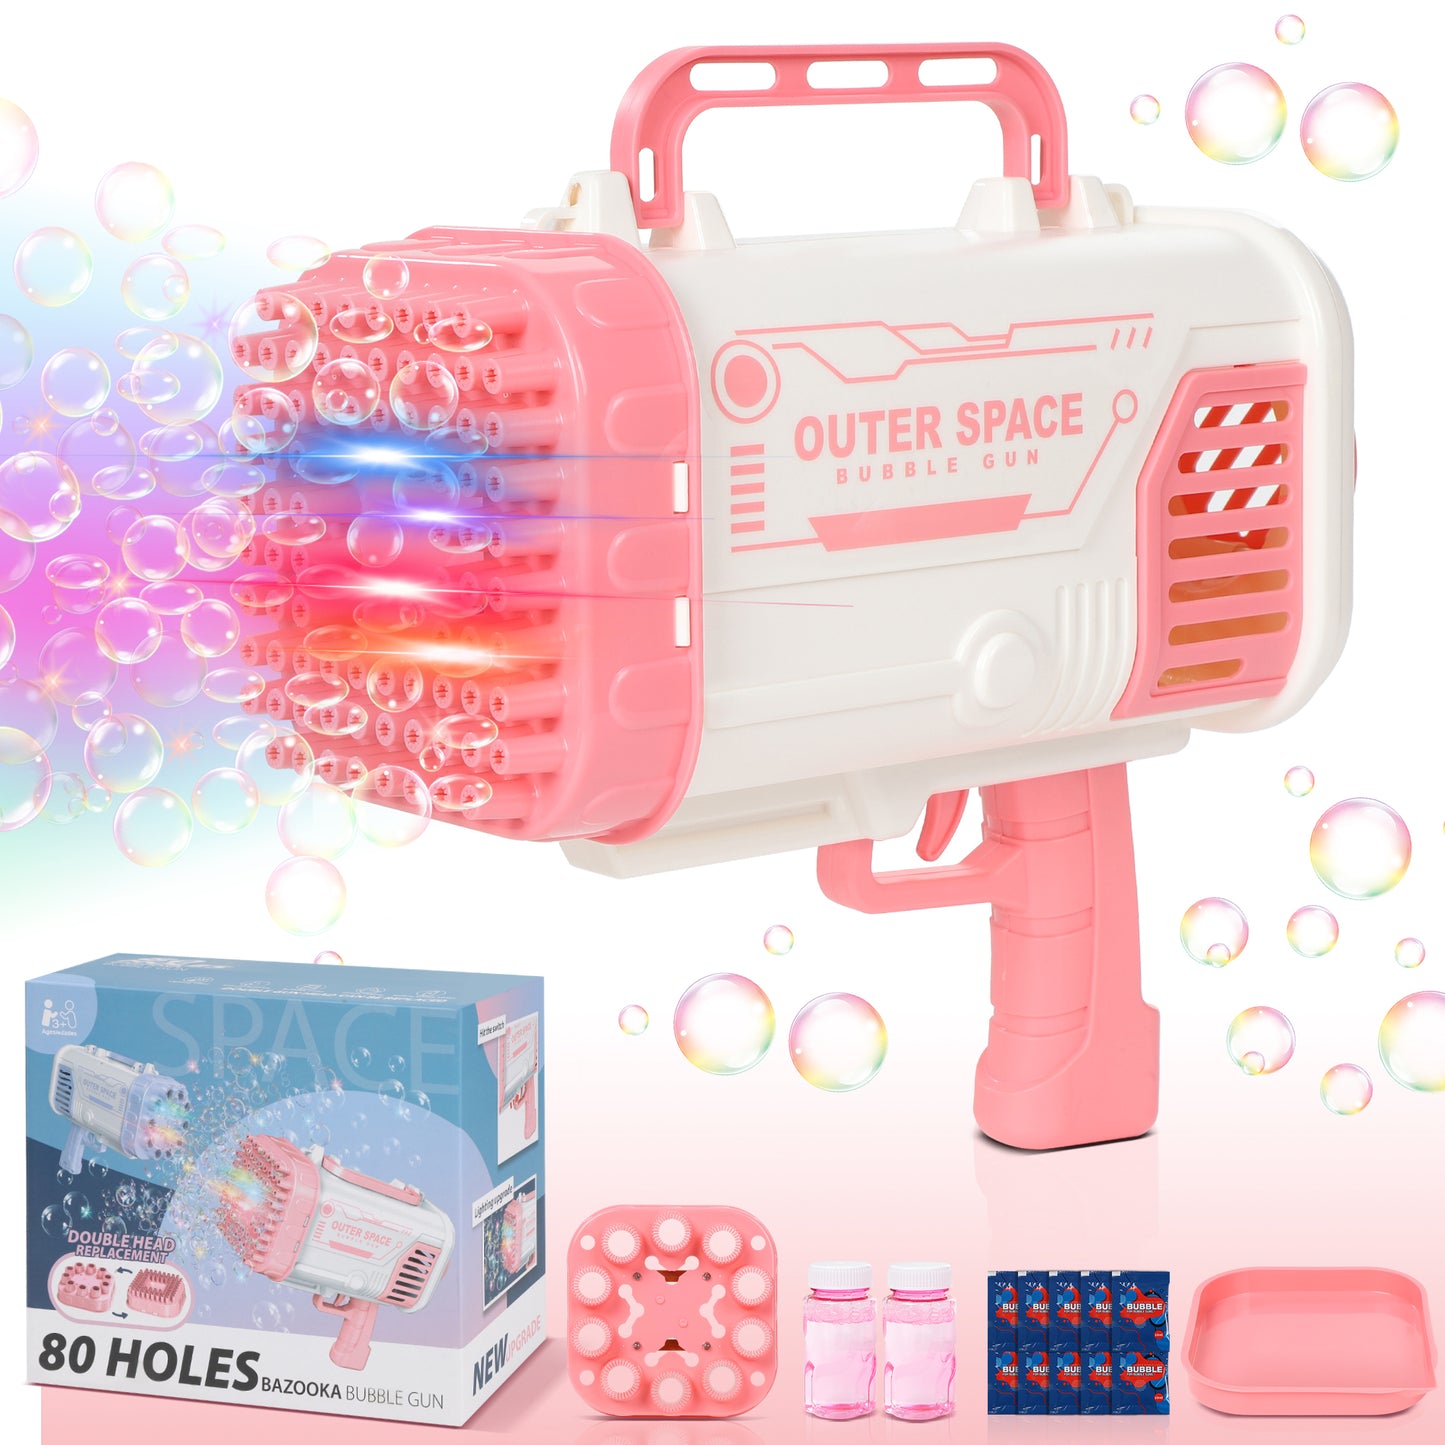 WISAIRT Bubble Machine, Upgraded 80 Holes Bubble Gun with Replaceable Nozzle, 2 Bubble Solution and Colorful Lights, Bubble Machine for Kids Adult Summer Outdoor Birthday Wedding Party Activities